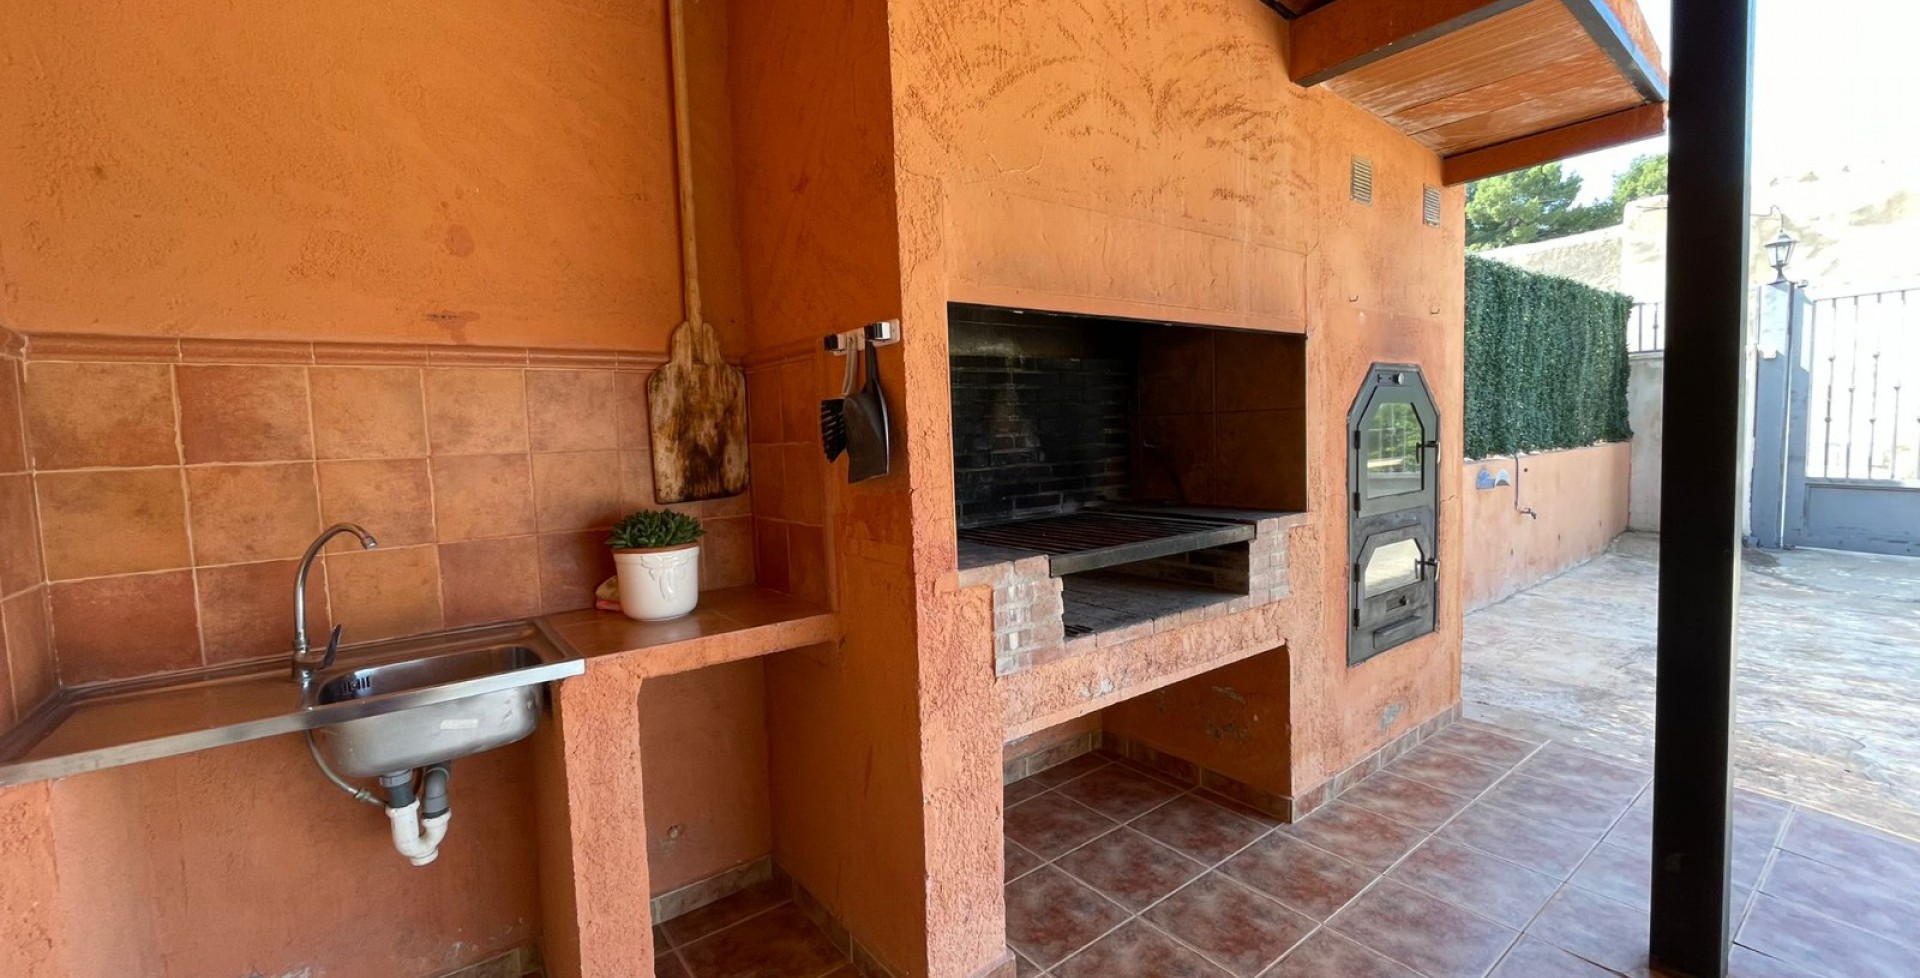 immaculate villa with traditional spanish oven